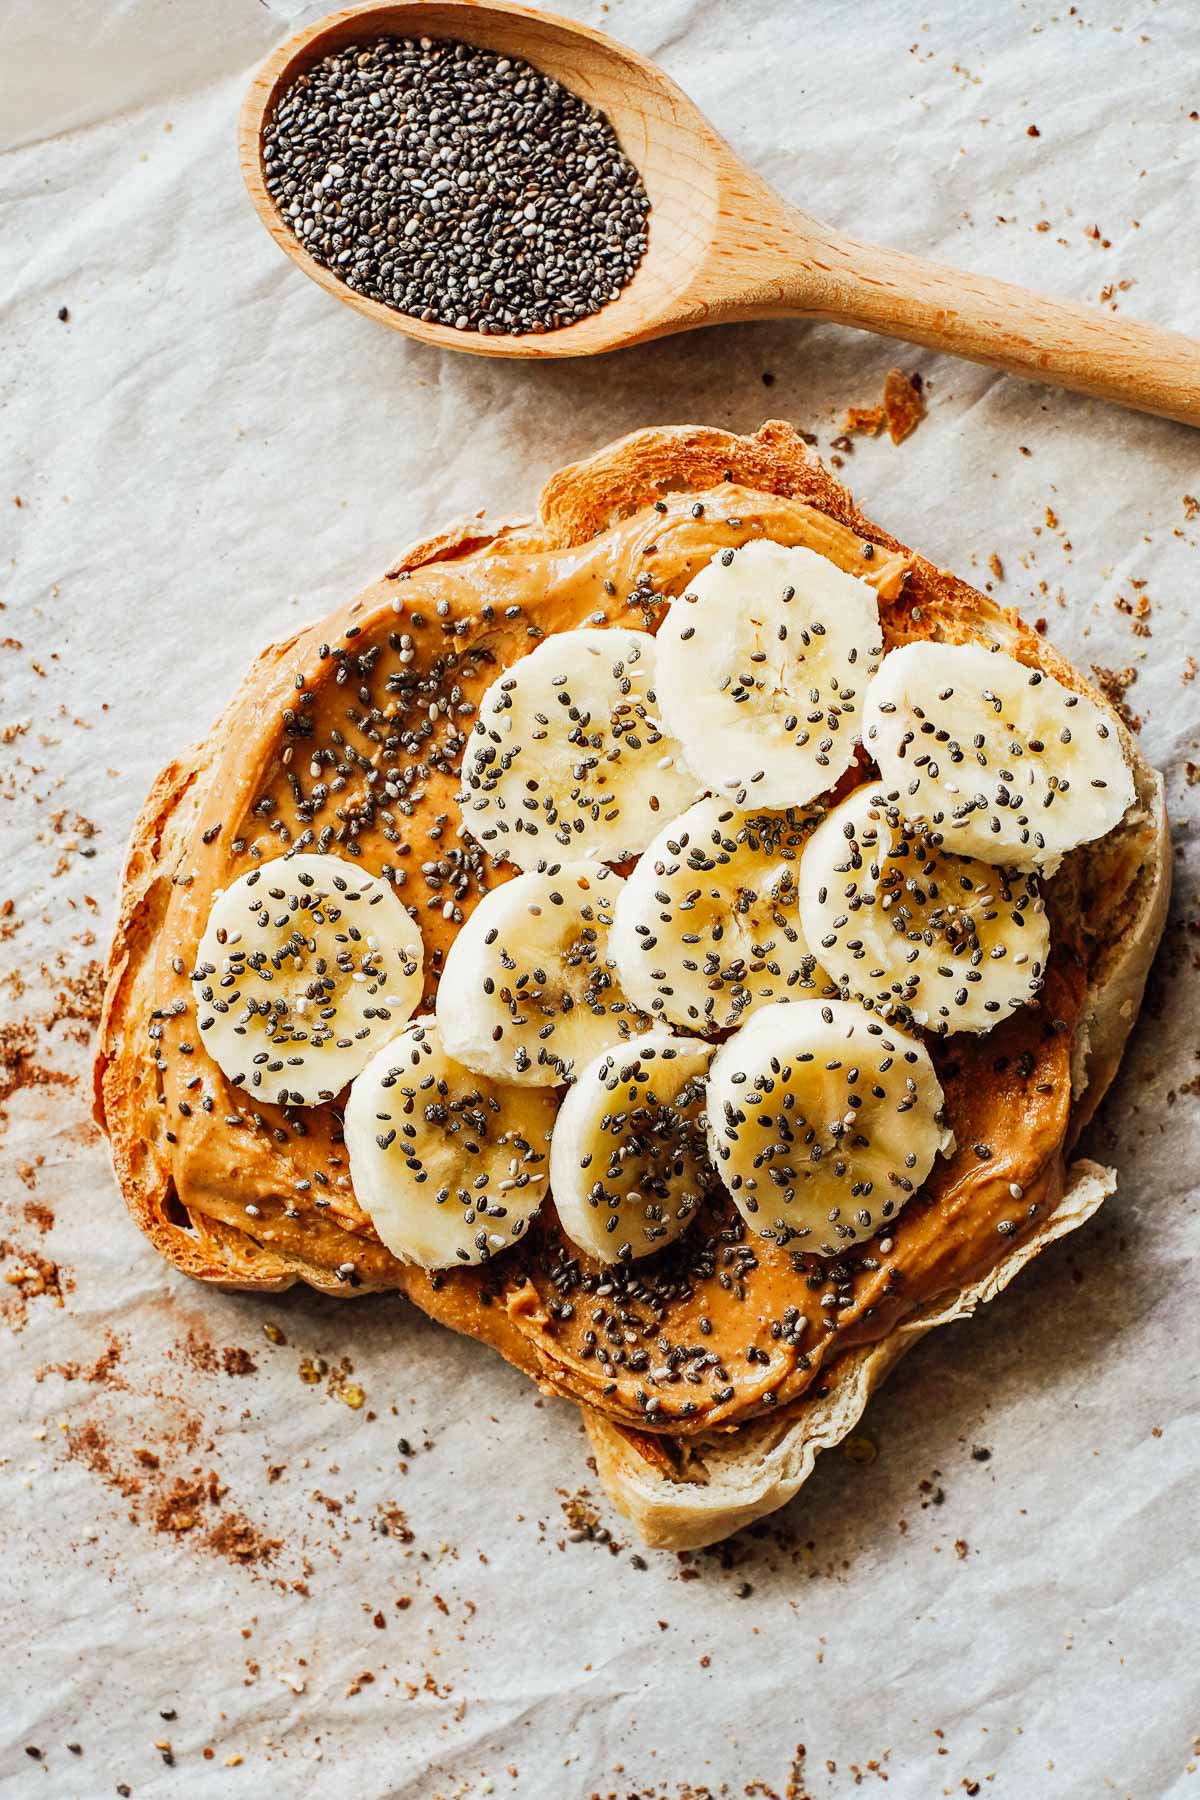 Toast with peanut butter and banana sprinkled with chia seeds.